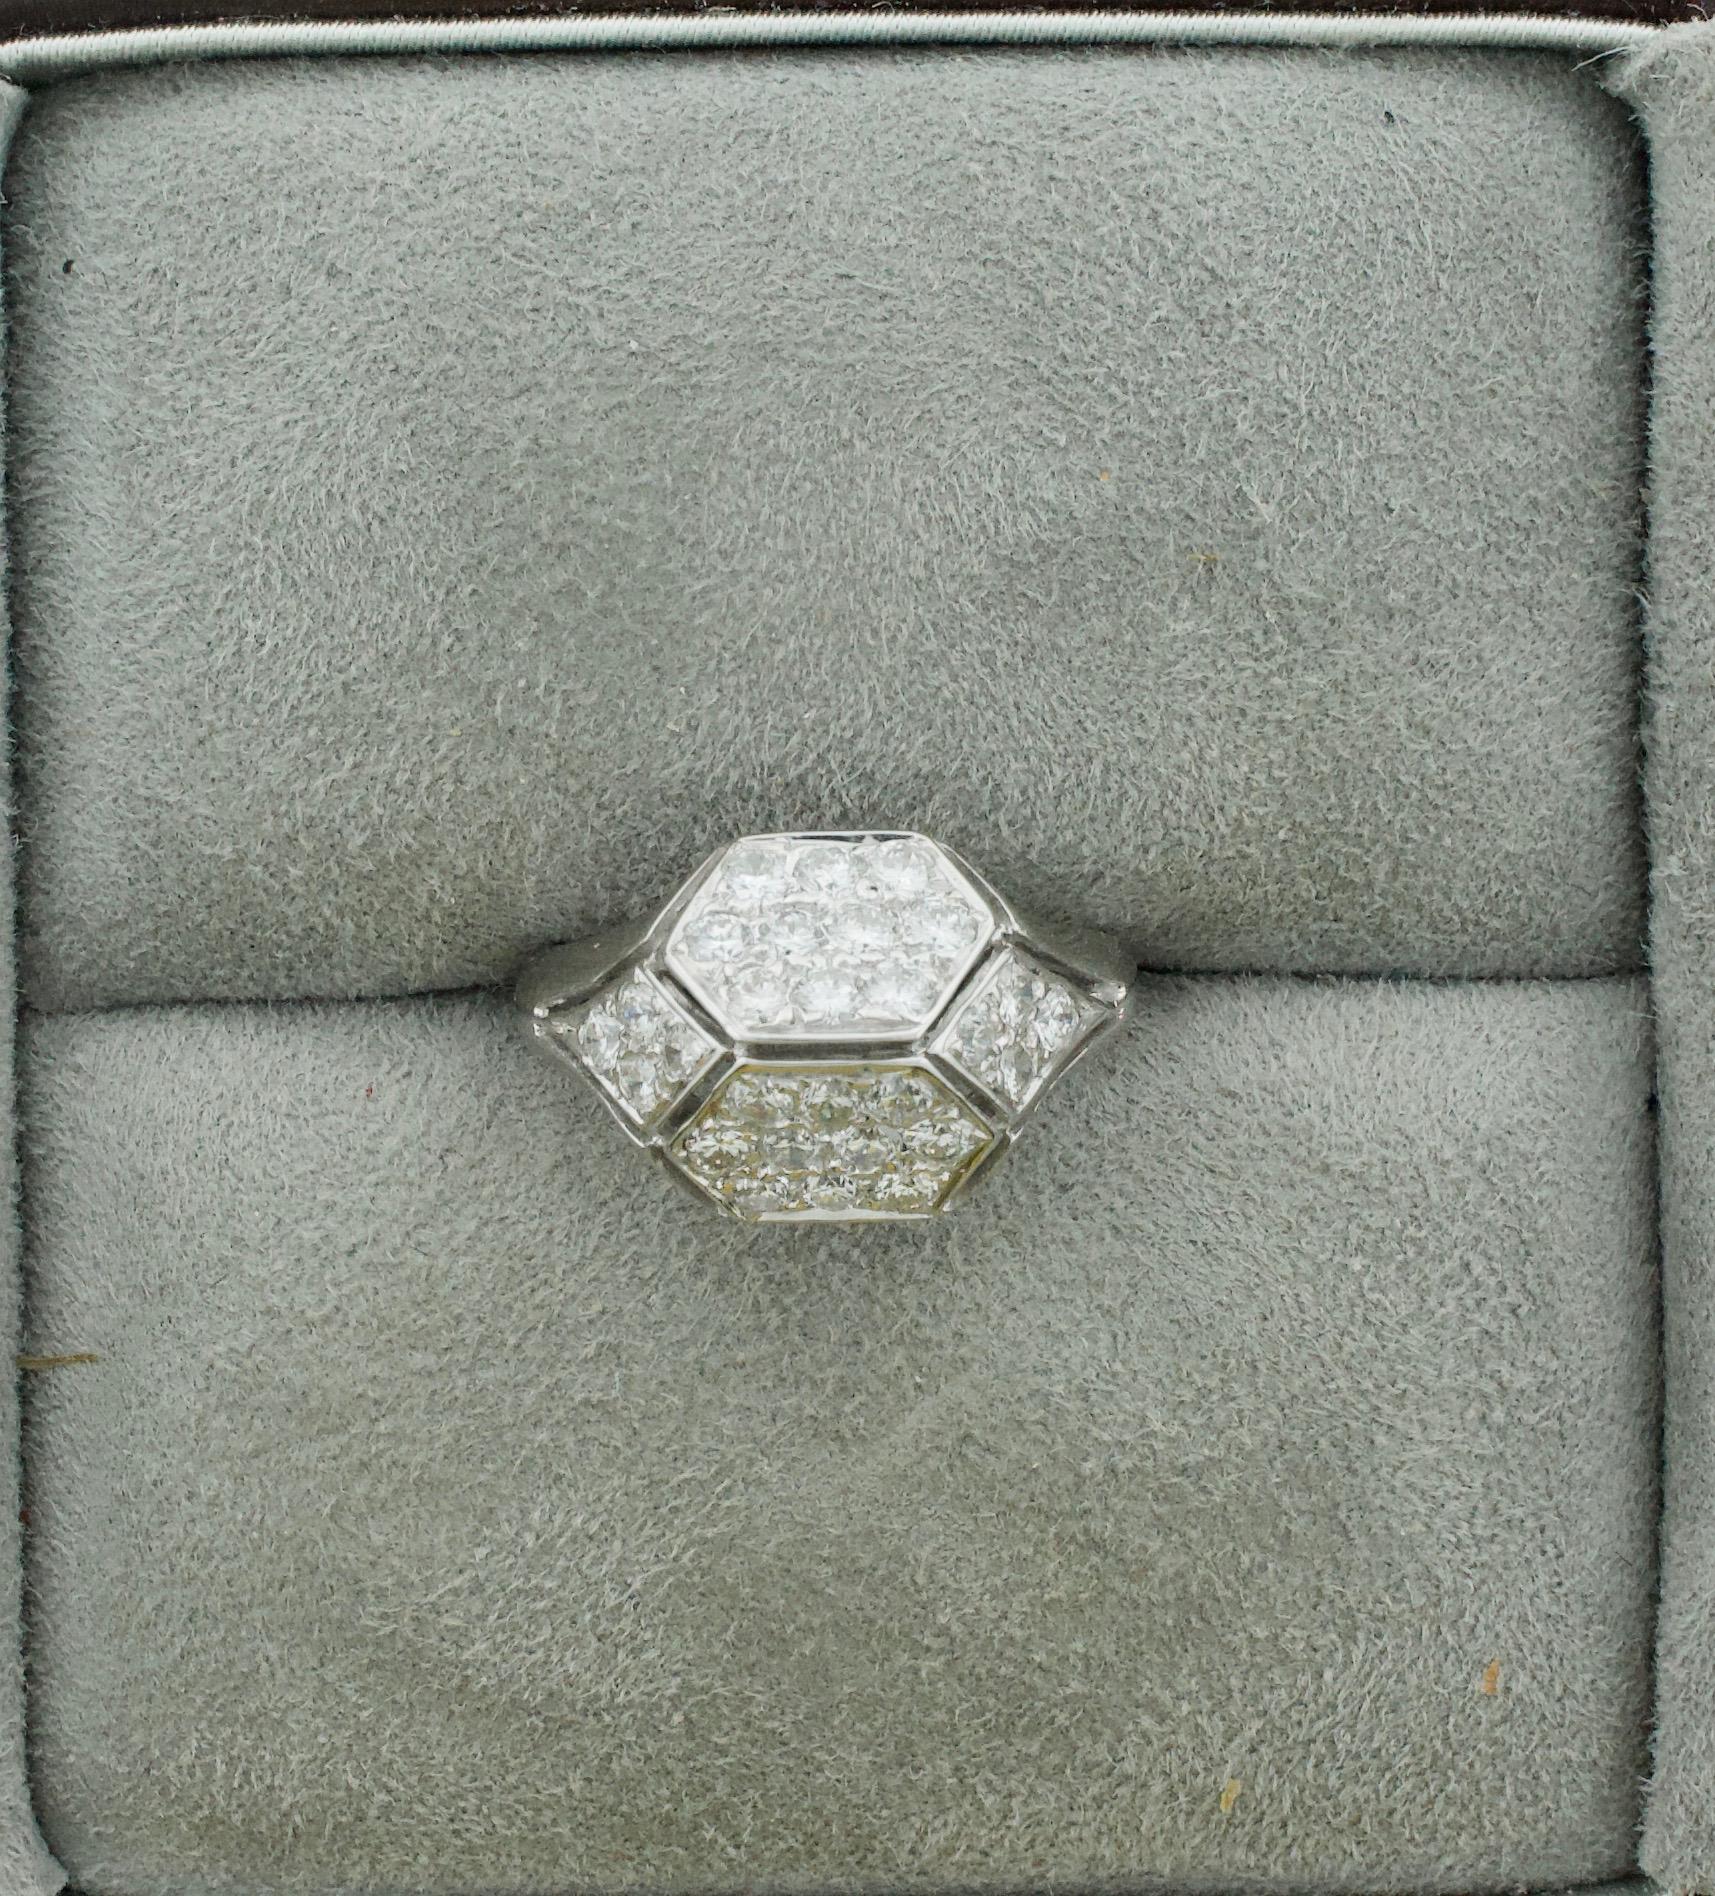 Delightful Platinum Modular Diamond Ring in Platinum circa 1960's
Twenty Six Round Brilliant Cut Diamonds Weighing .80 Carats Approximately [GH VVS-SI1]
Currently Size 6 Can Be Sized By Us Or Your Qualified Jeweler